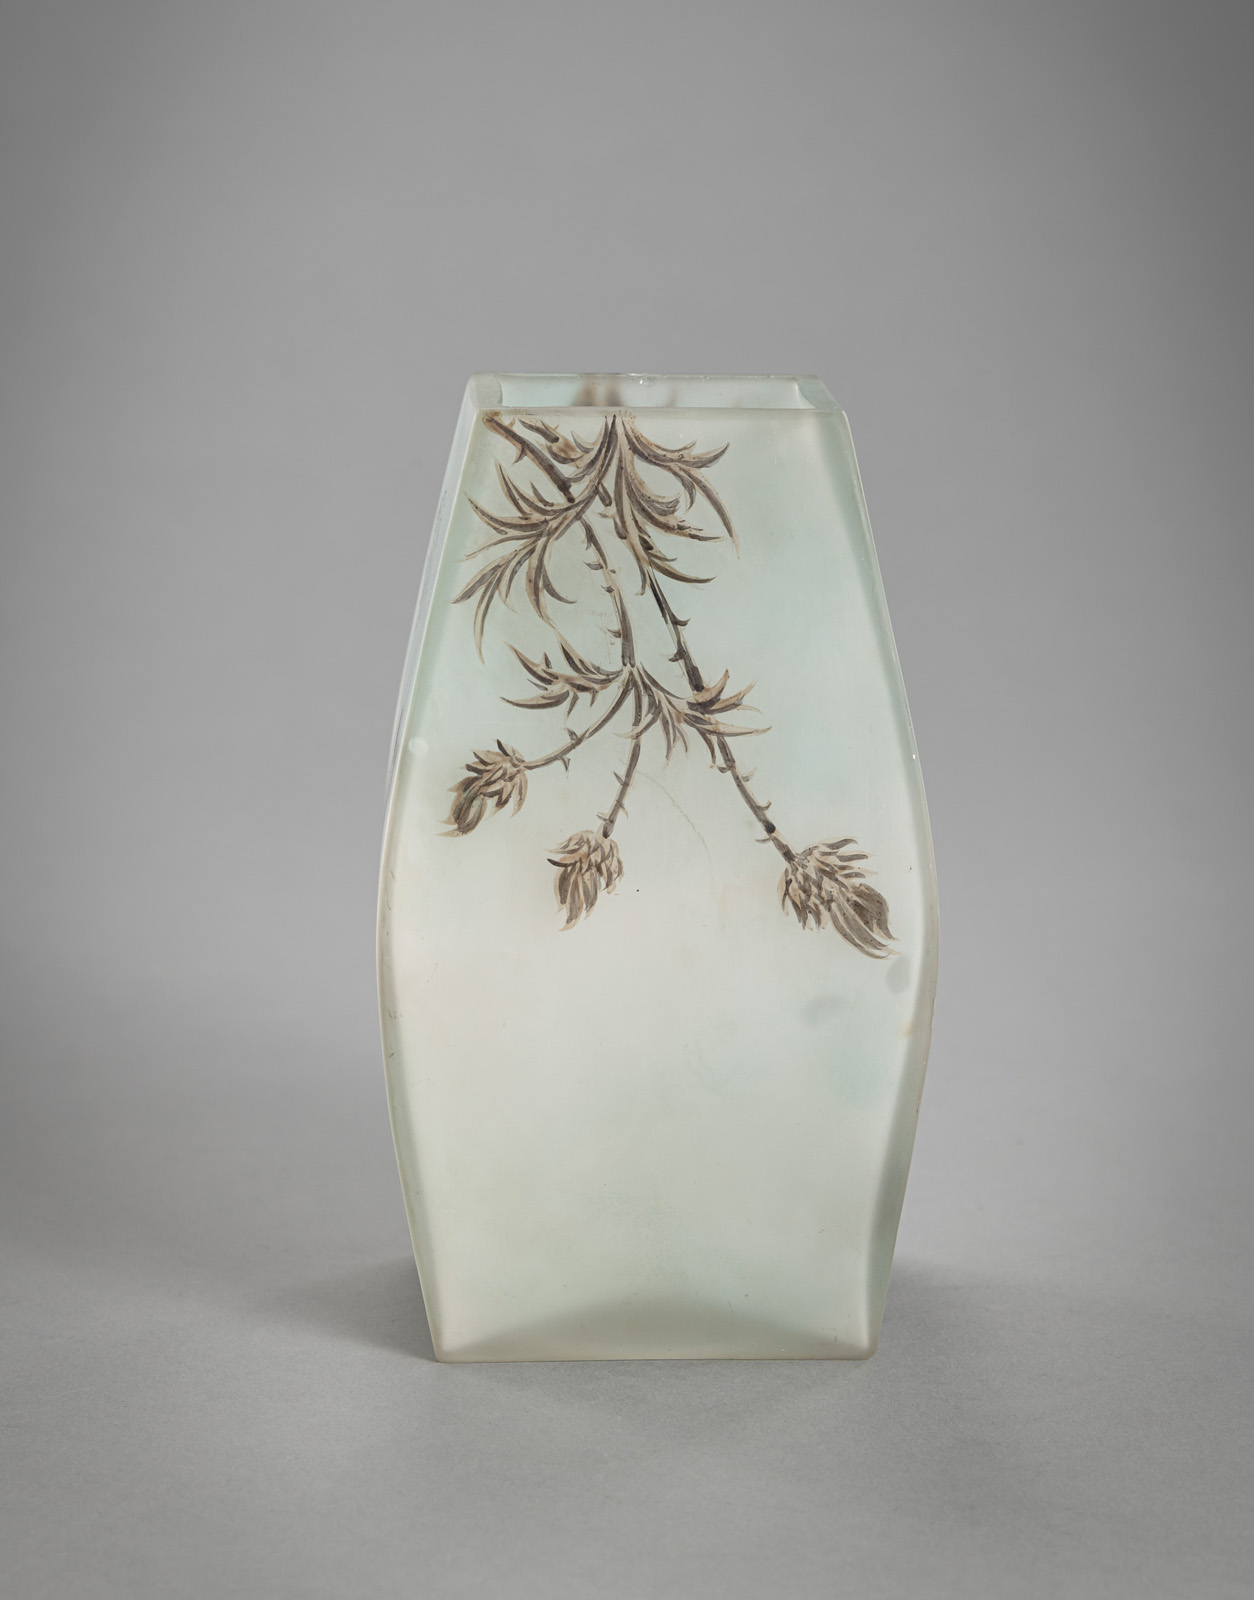 AN ENAMEL PAINTED THISTLE PATTERN GLASS VASE - Image 4 of 7